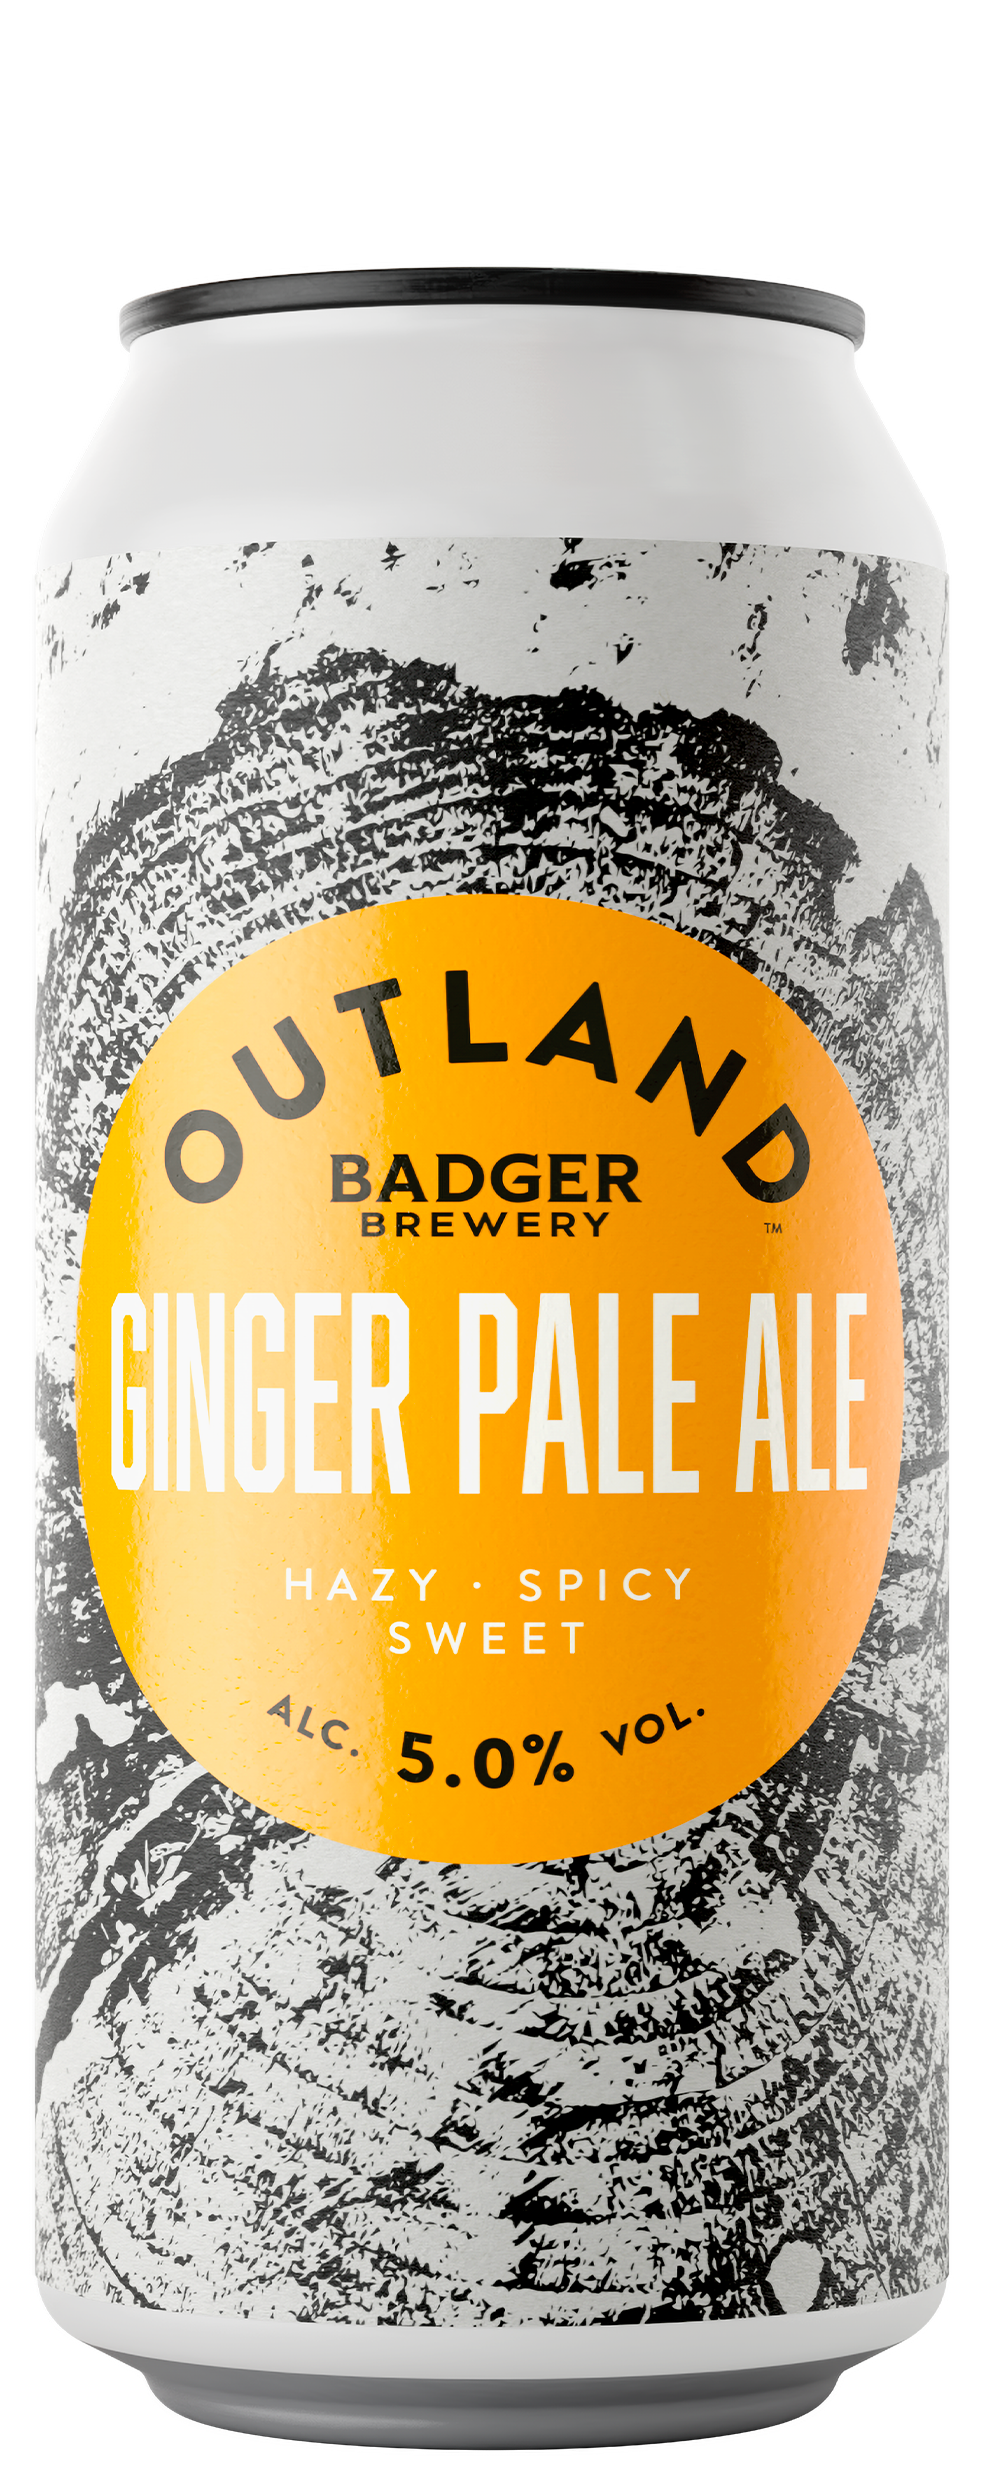 Outland Ginger Pale Ale